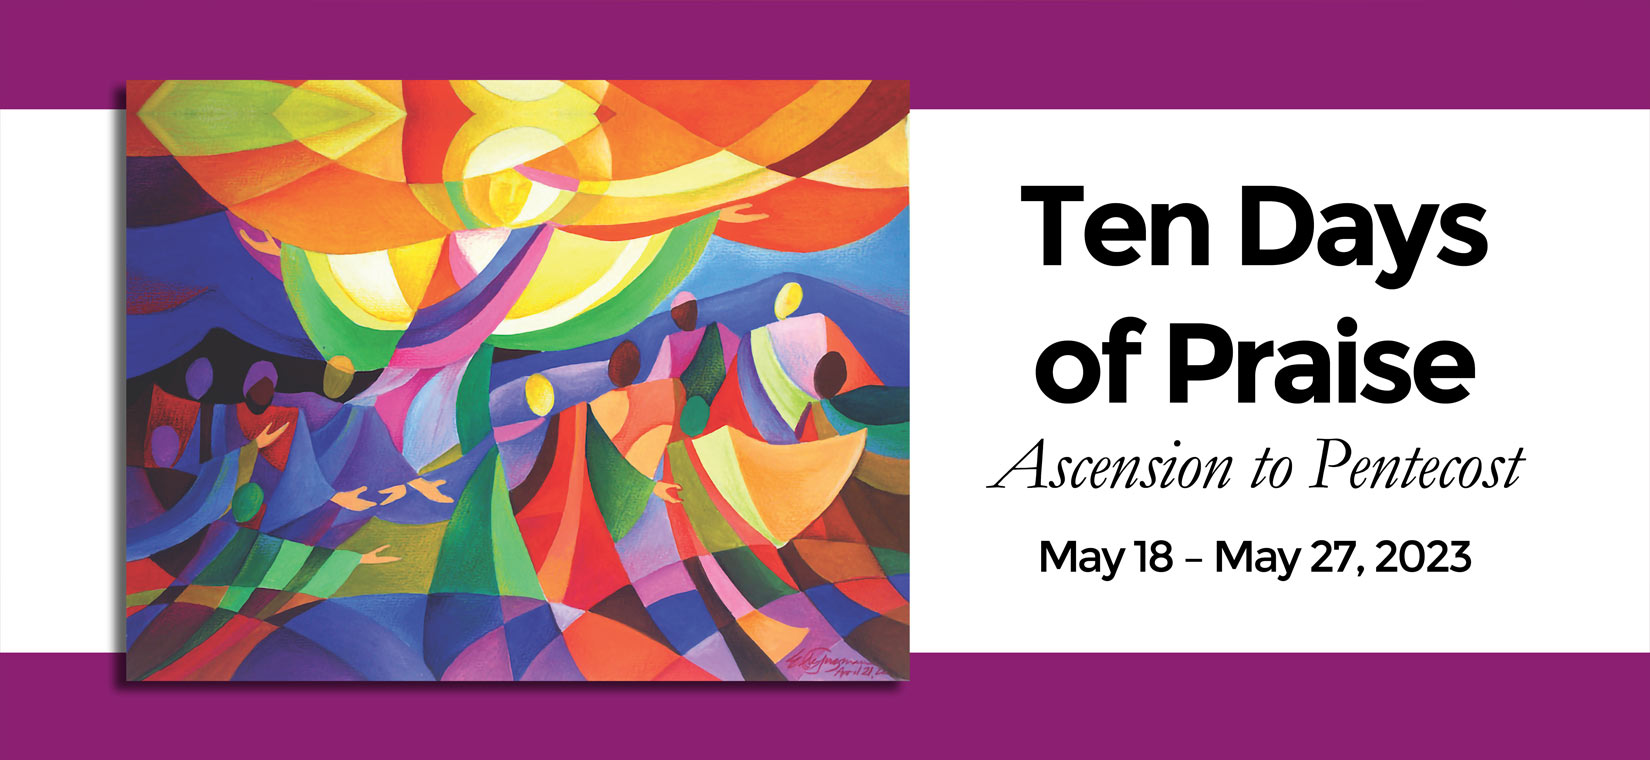 Ten Days of Praise; Ascension to Pentecost; May 18 - May 27, 2023